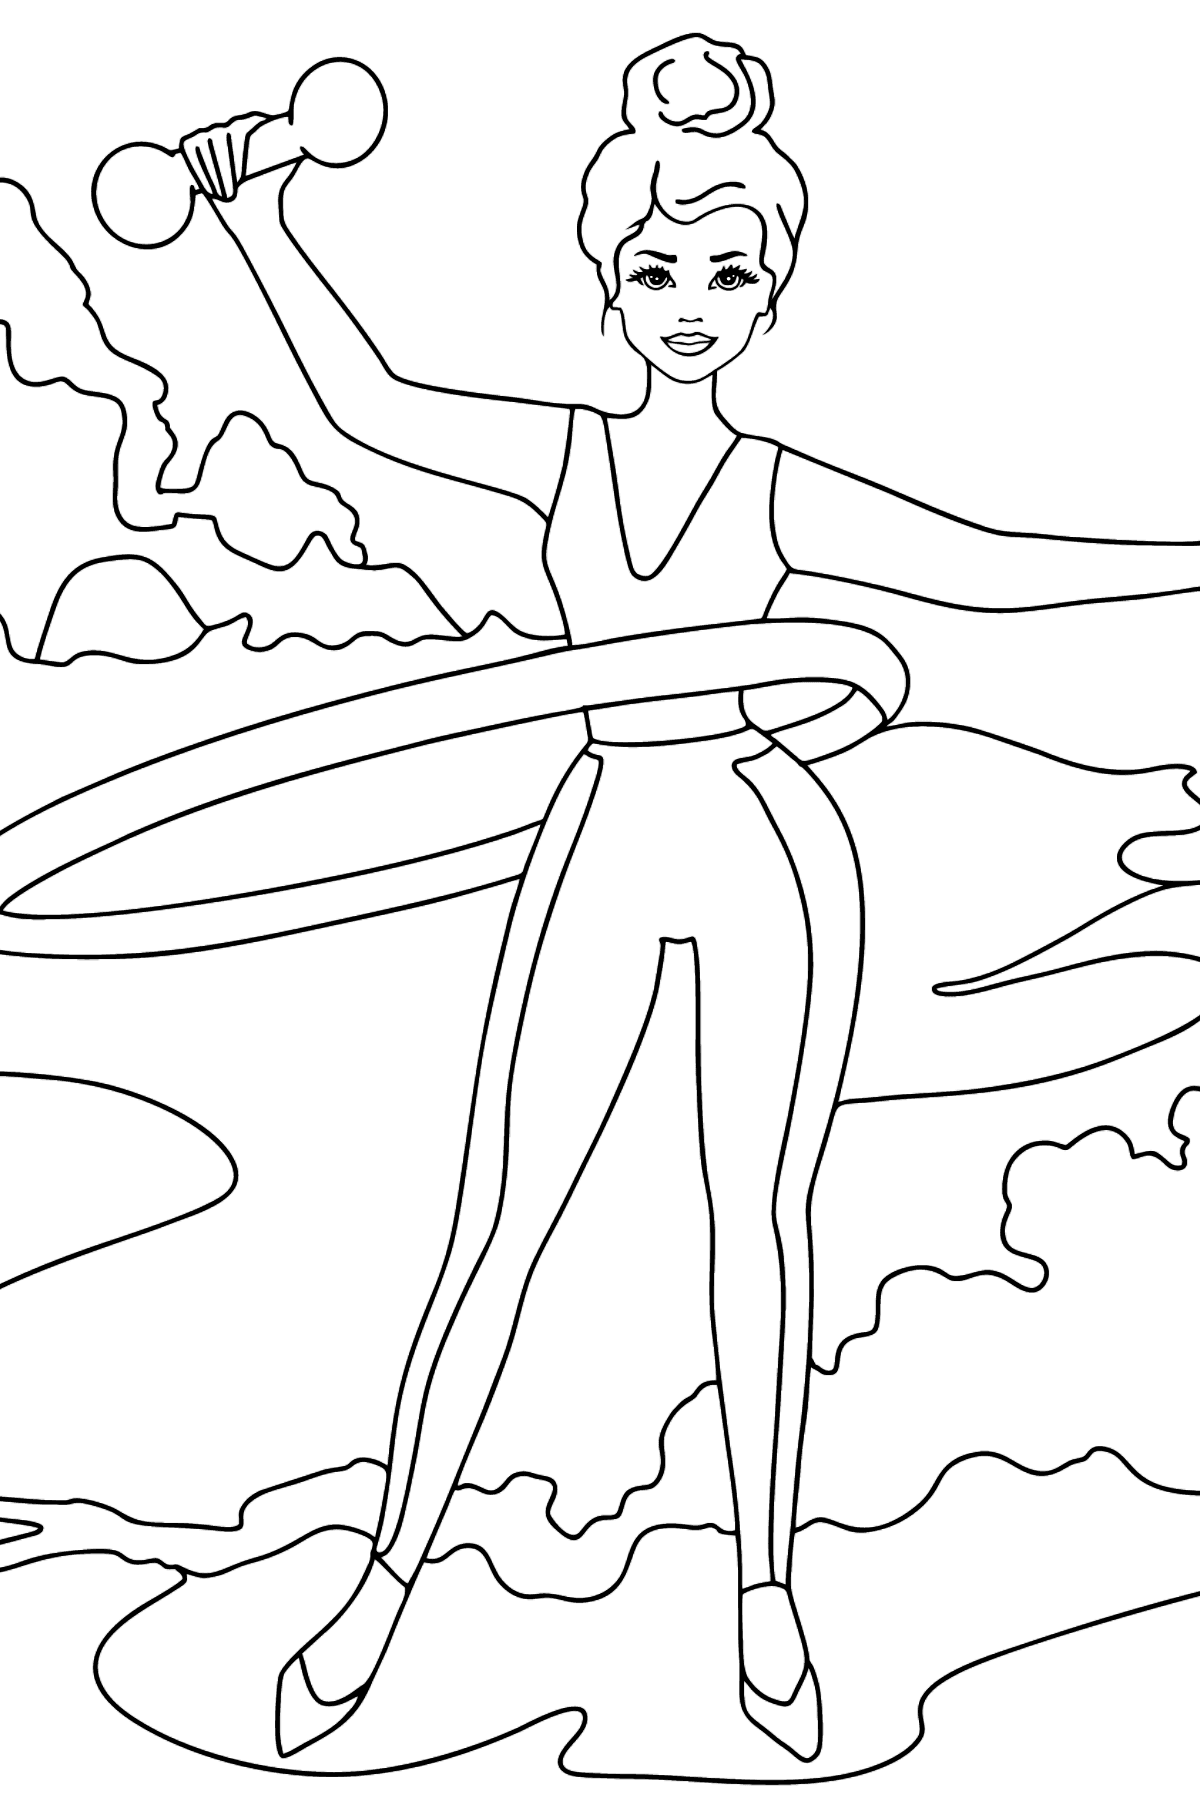 Barbie Doll and Sports coloring page - Coloring Pages for Kids